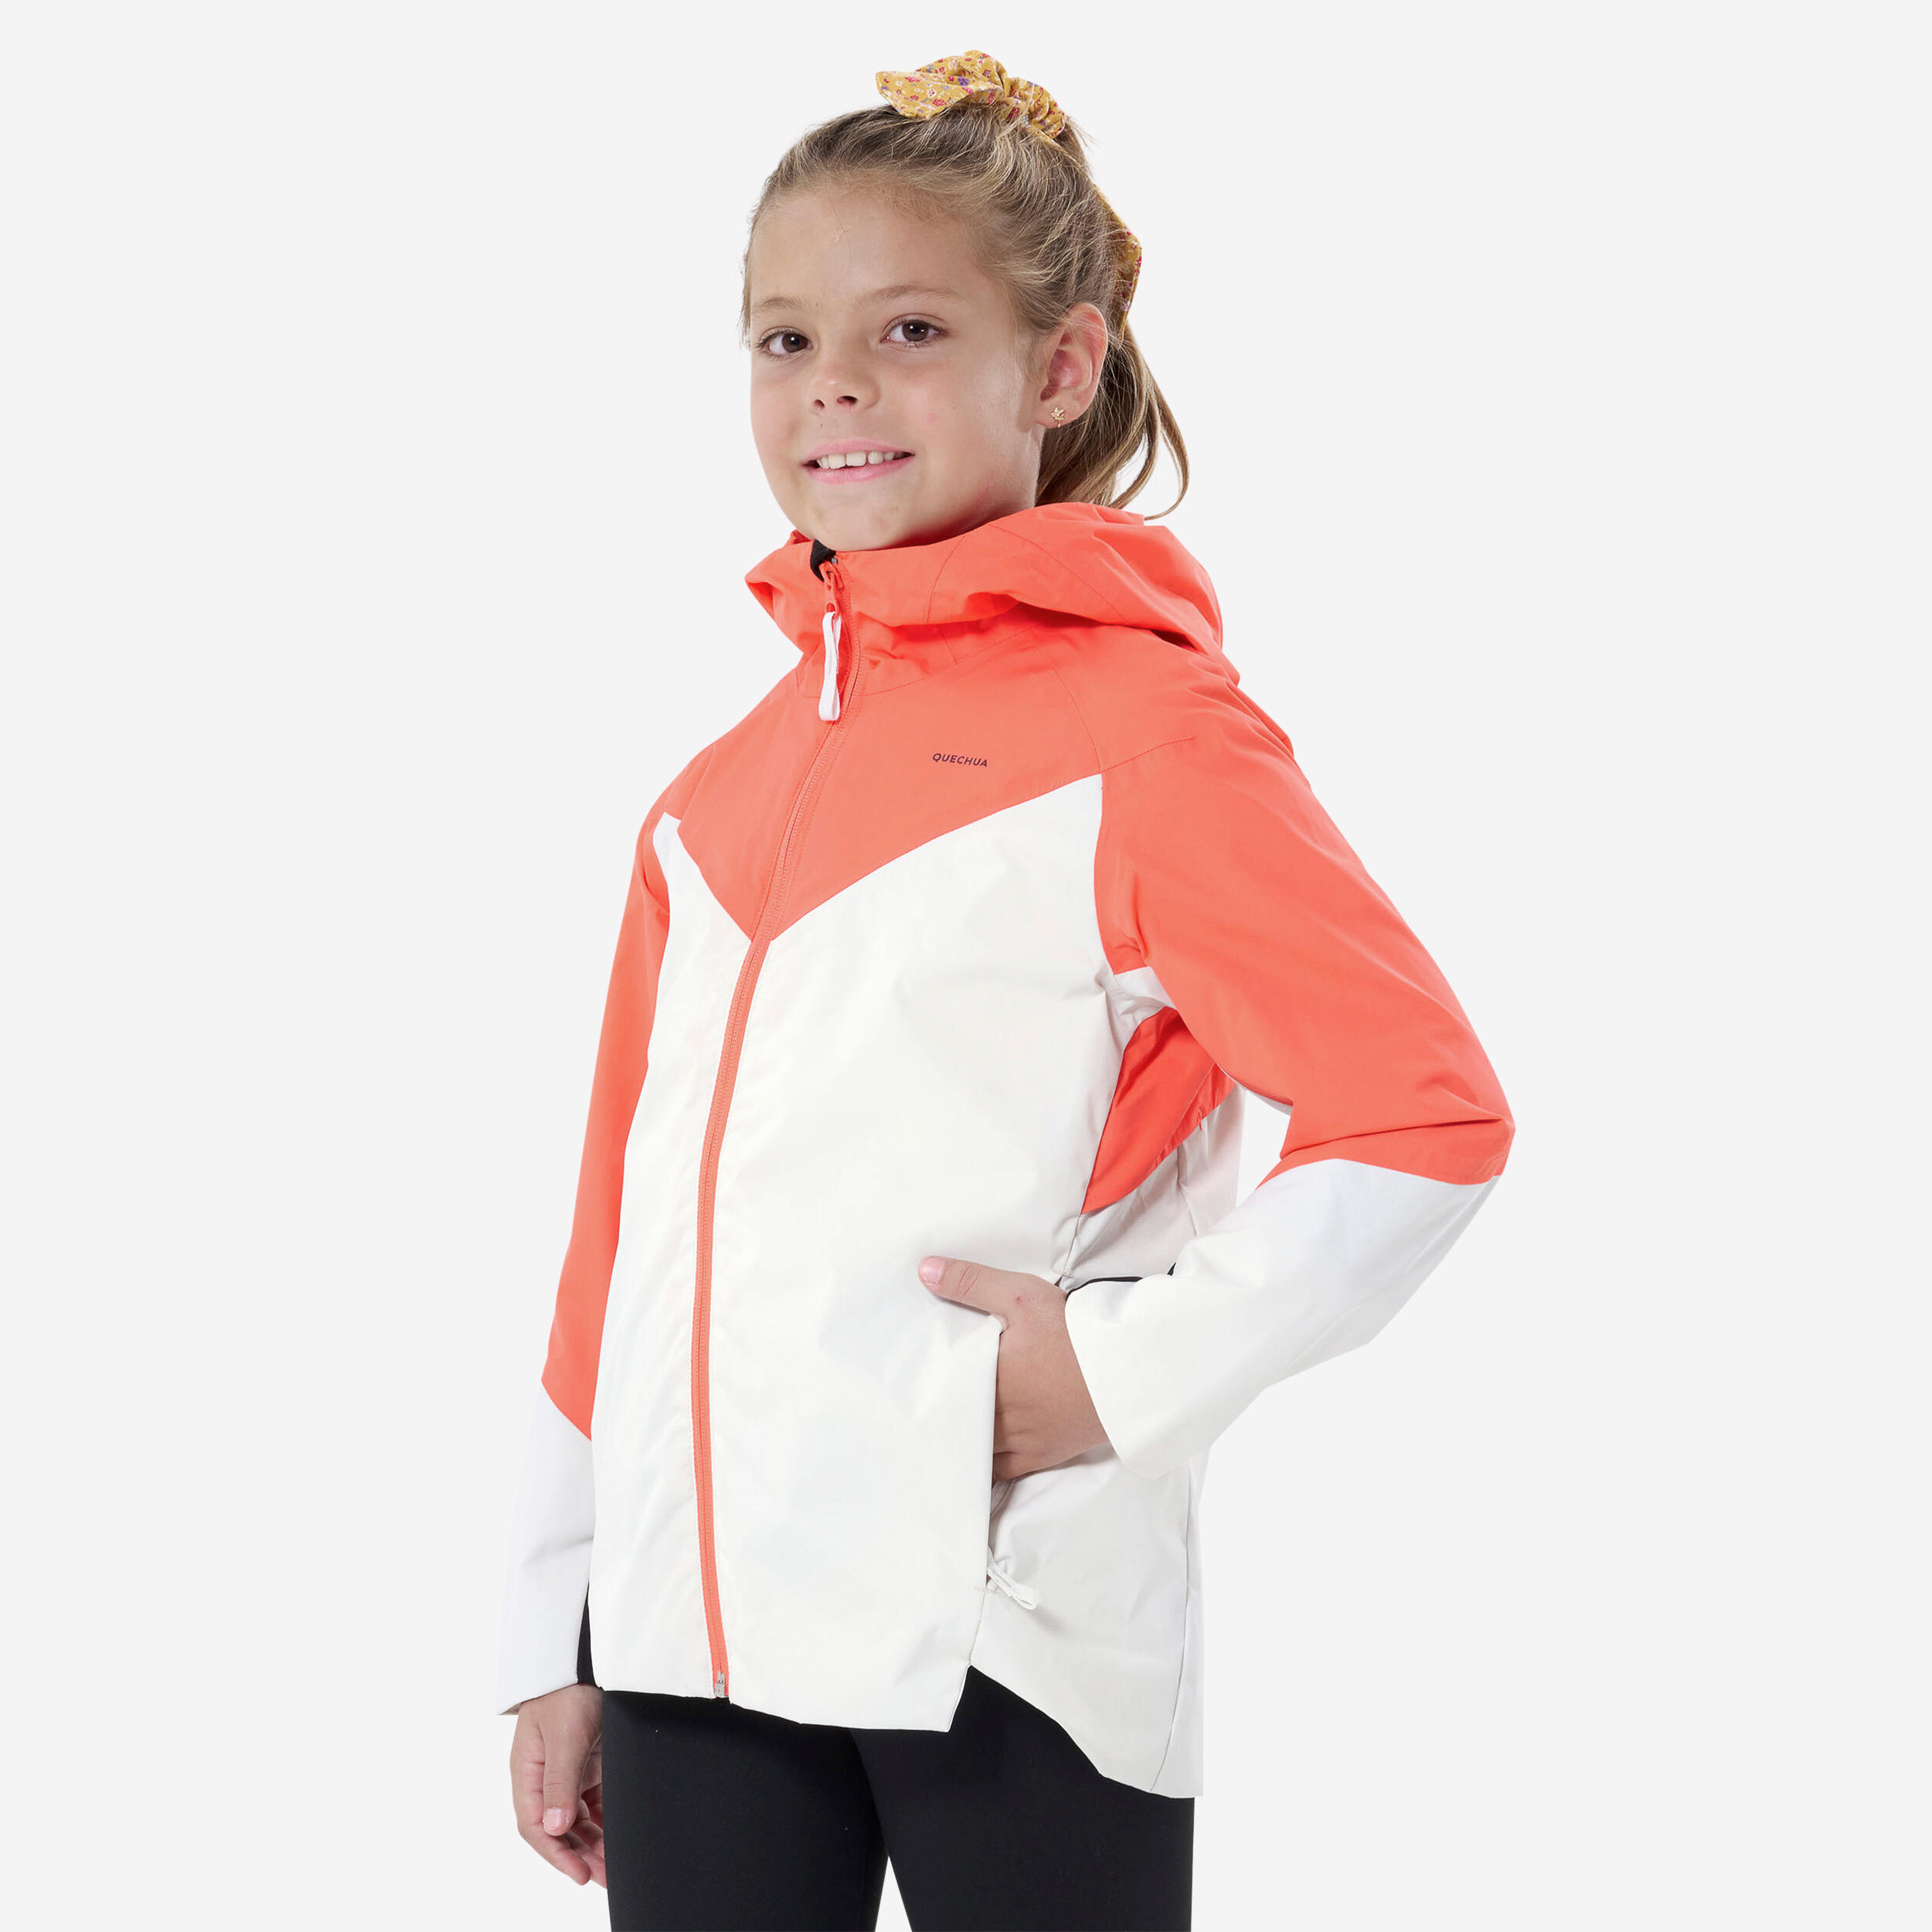 QUECHUA Child's waterproof hiking jacket - MH500 coral and beige - 7-15 years